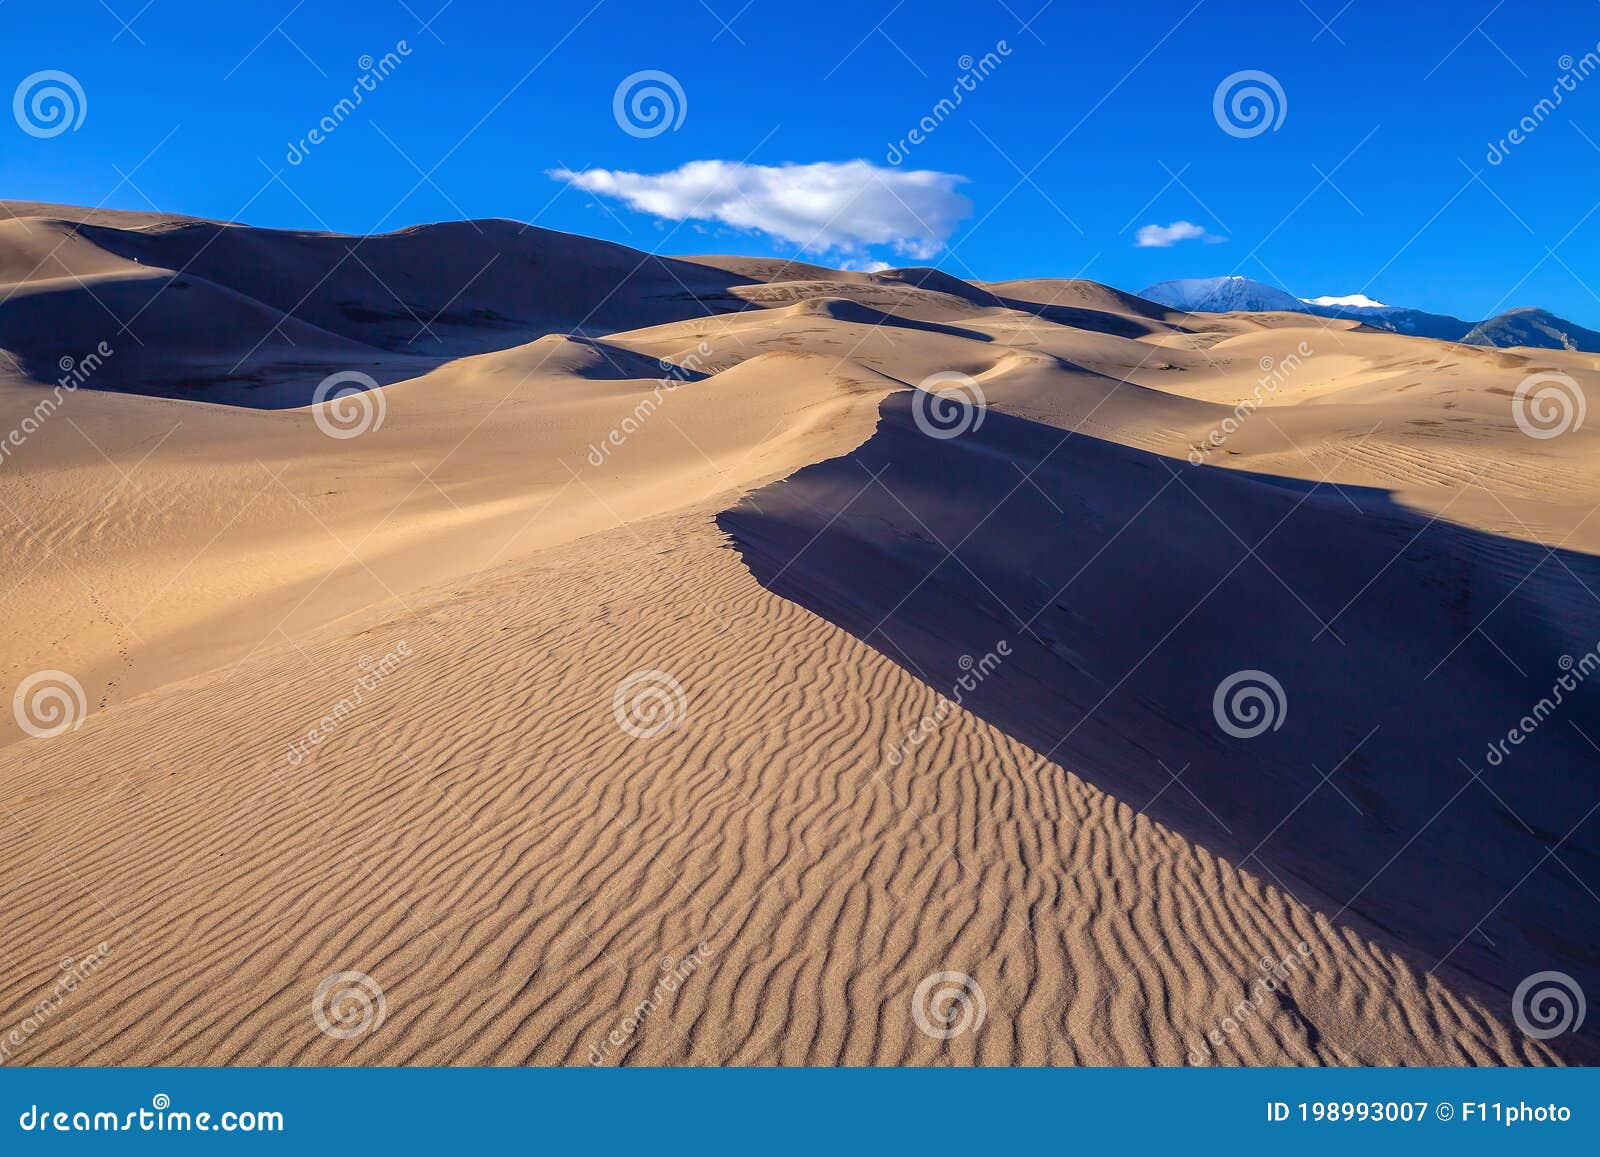 great sand dunes national park in colorado